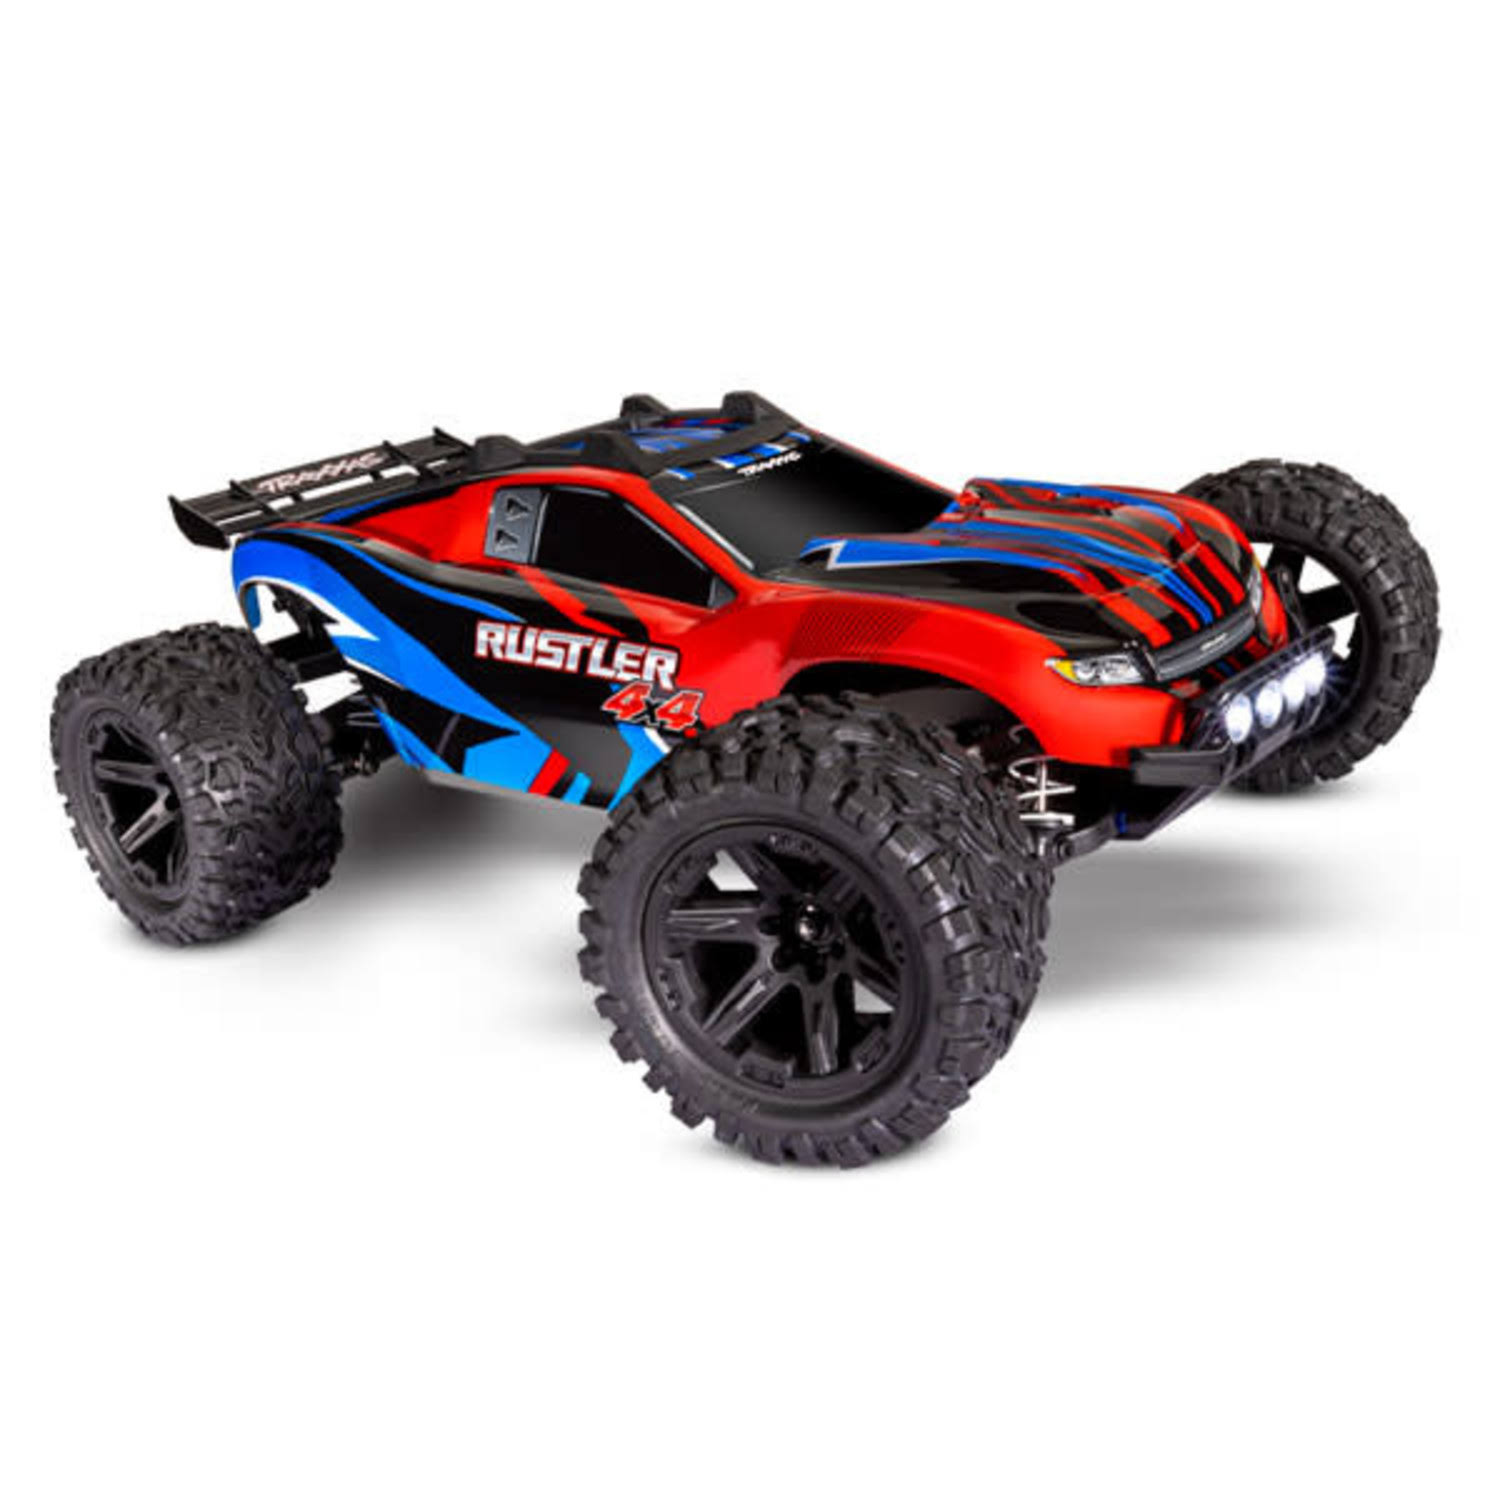 Traxxas 1/10 Rustler 4x4 4WD Stadium Truck with LED Lights - Red